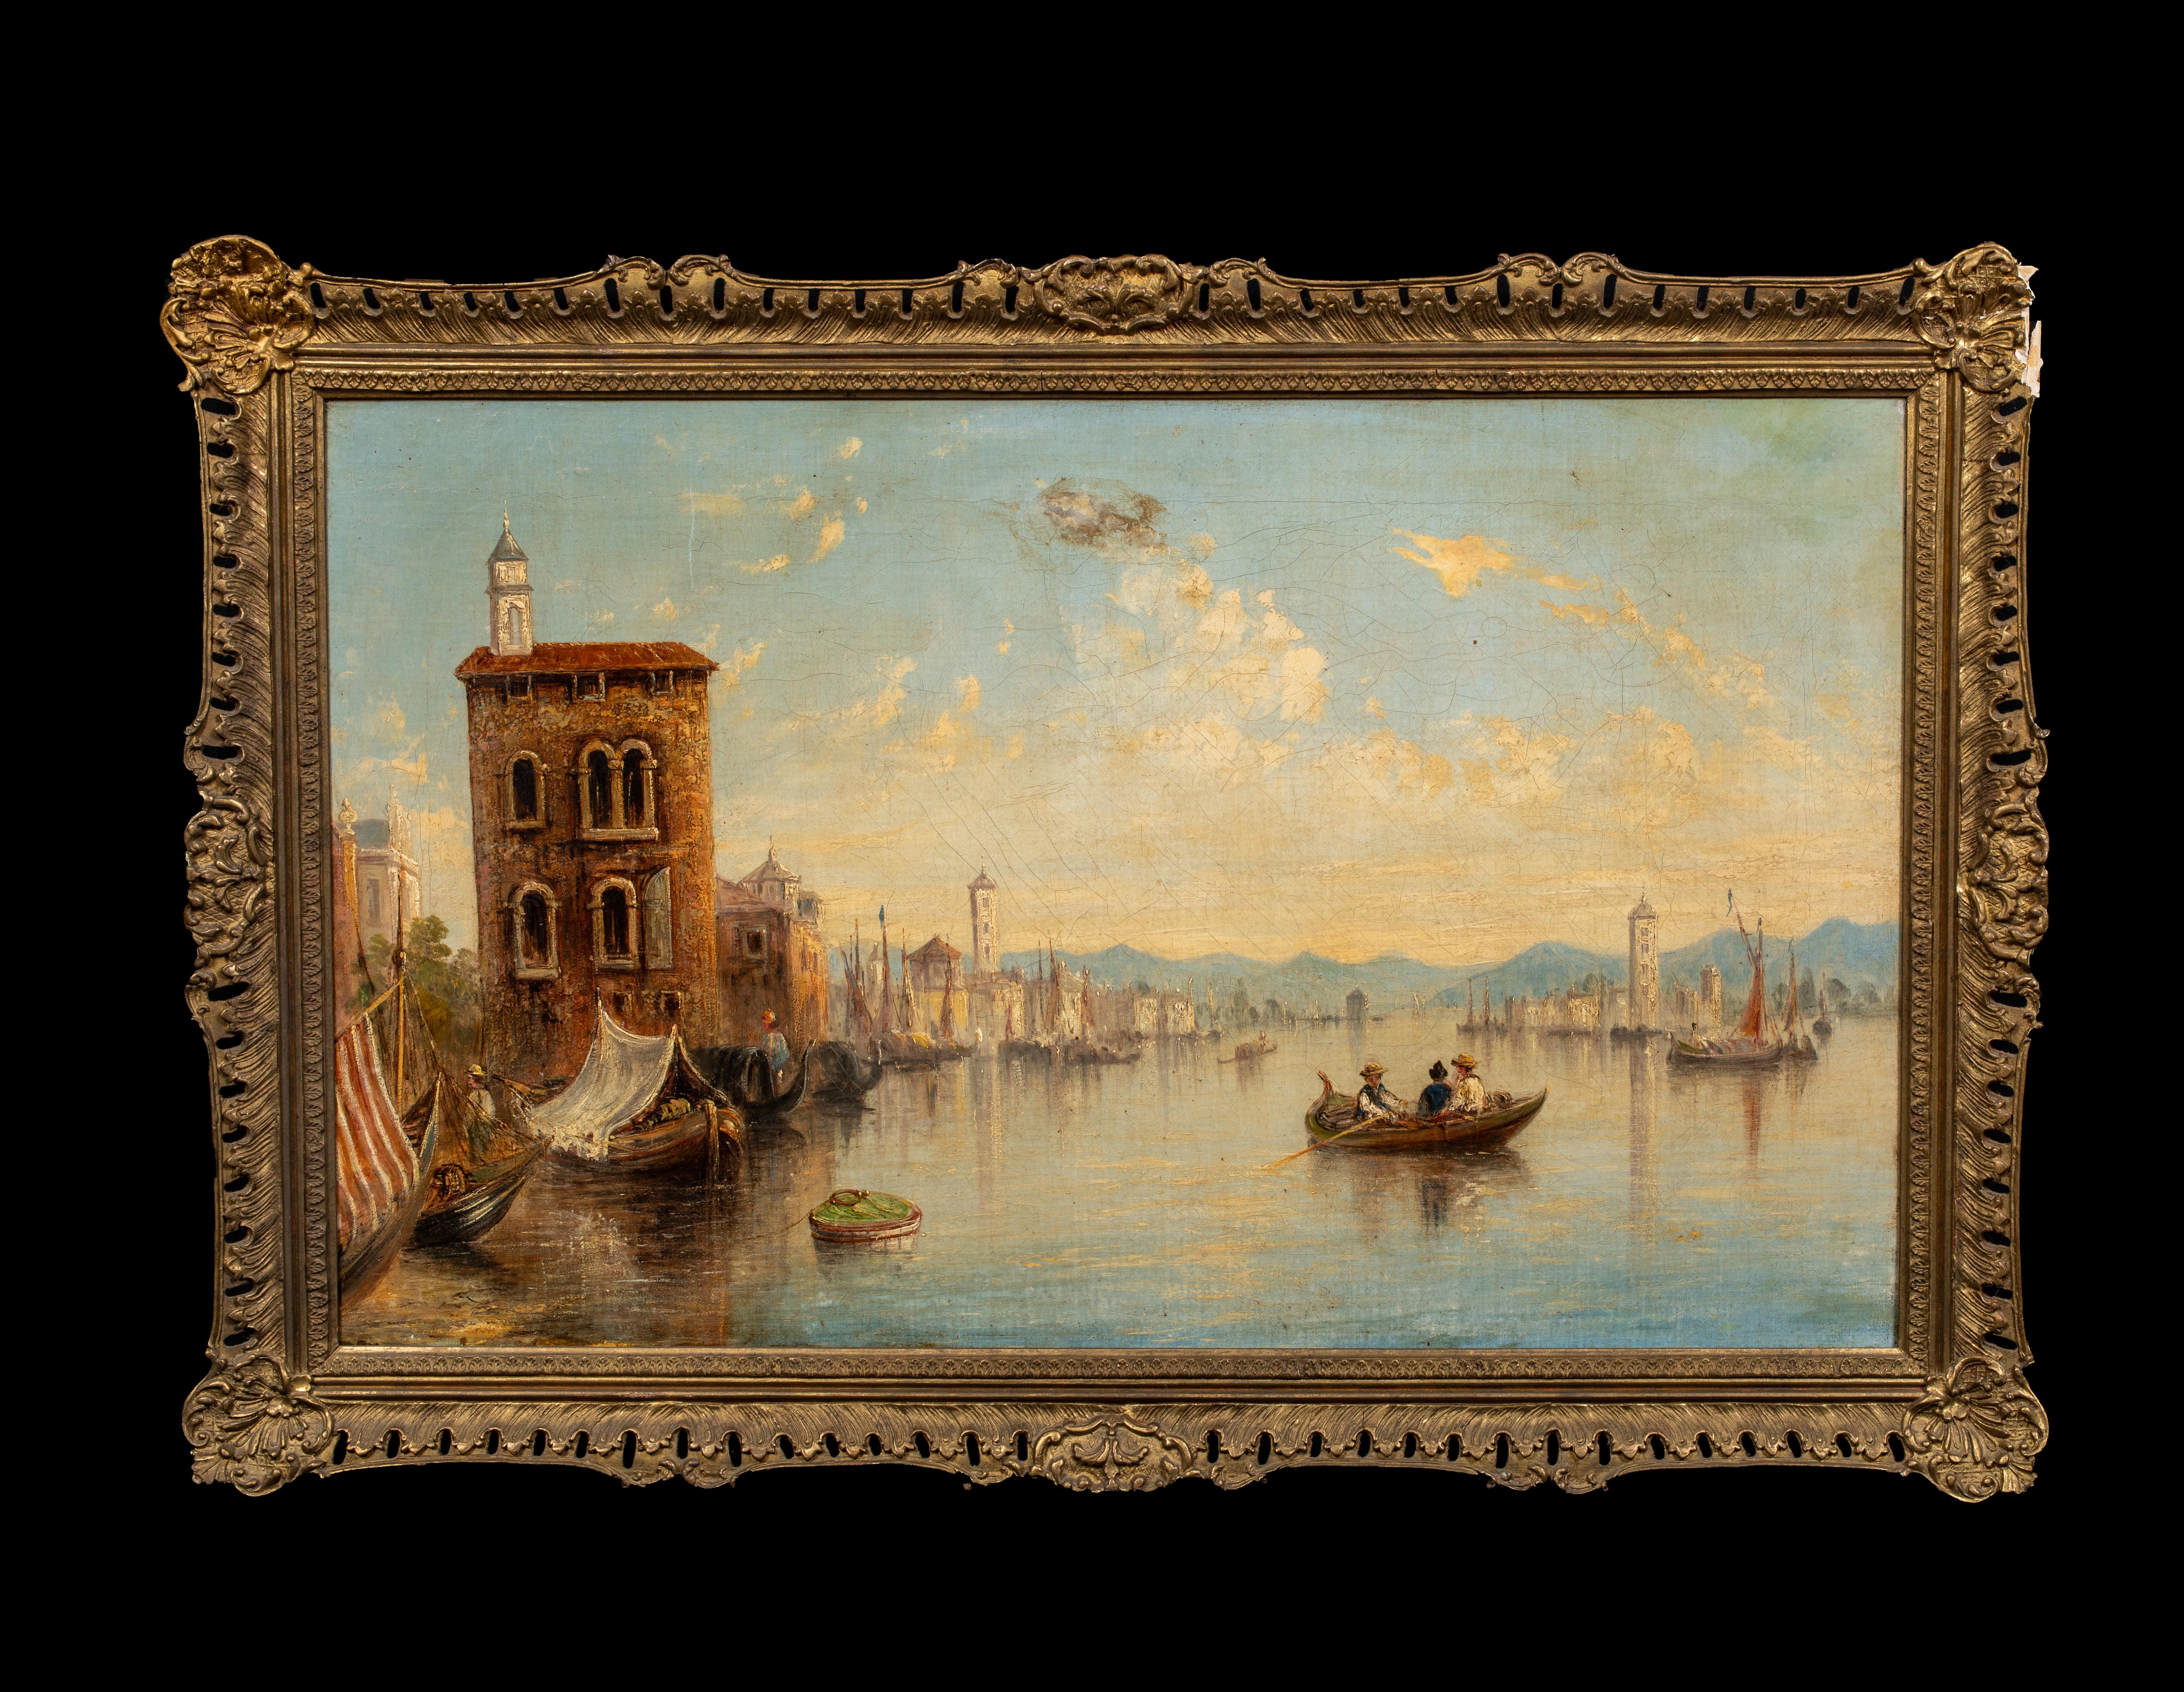 View Of Venice, 19th century - Painting by James Salt